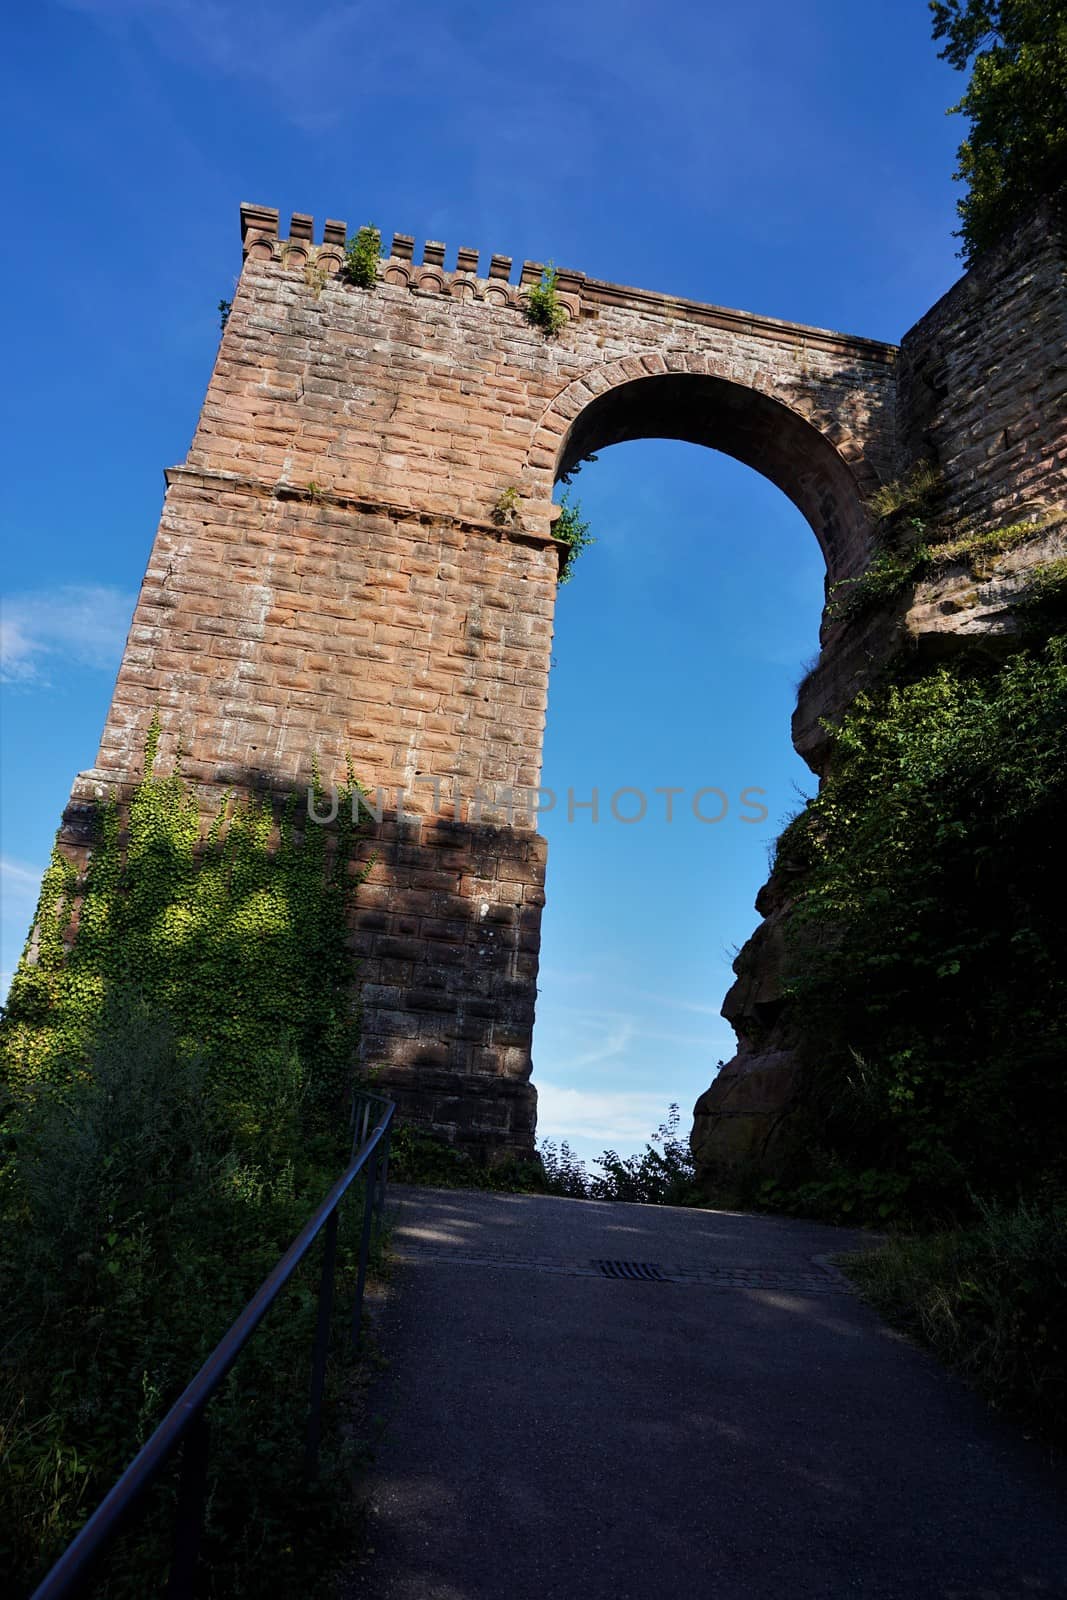 A red sandstone arch spotted in Rhineland-Palatinate, Germany